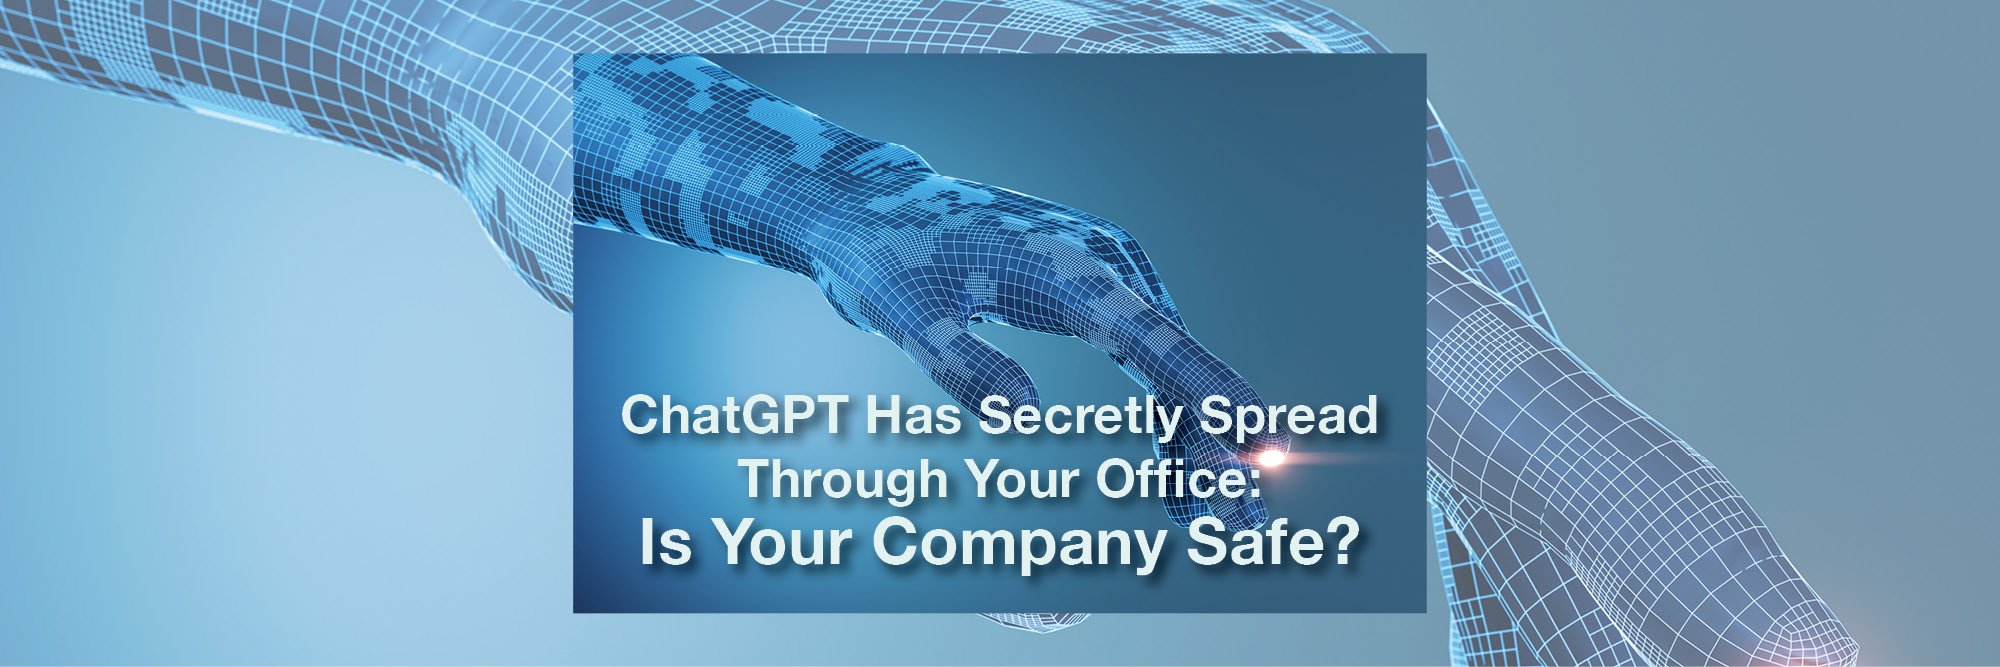 ChatGPT has secretly spread through your office: Is your company safe?